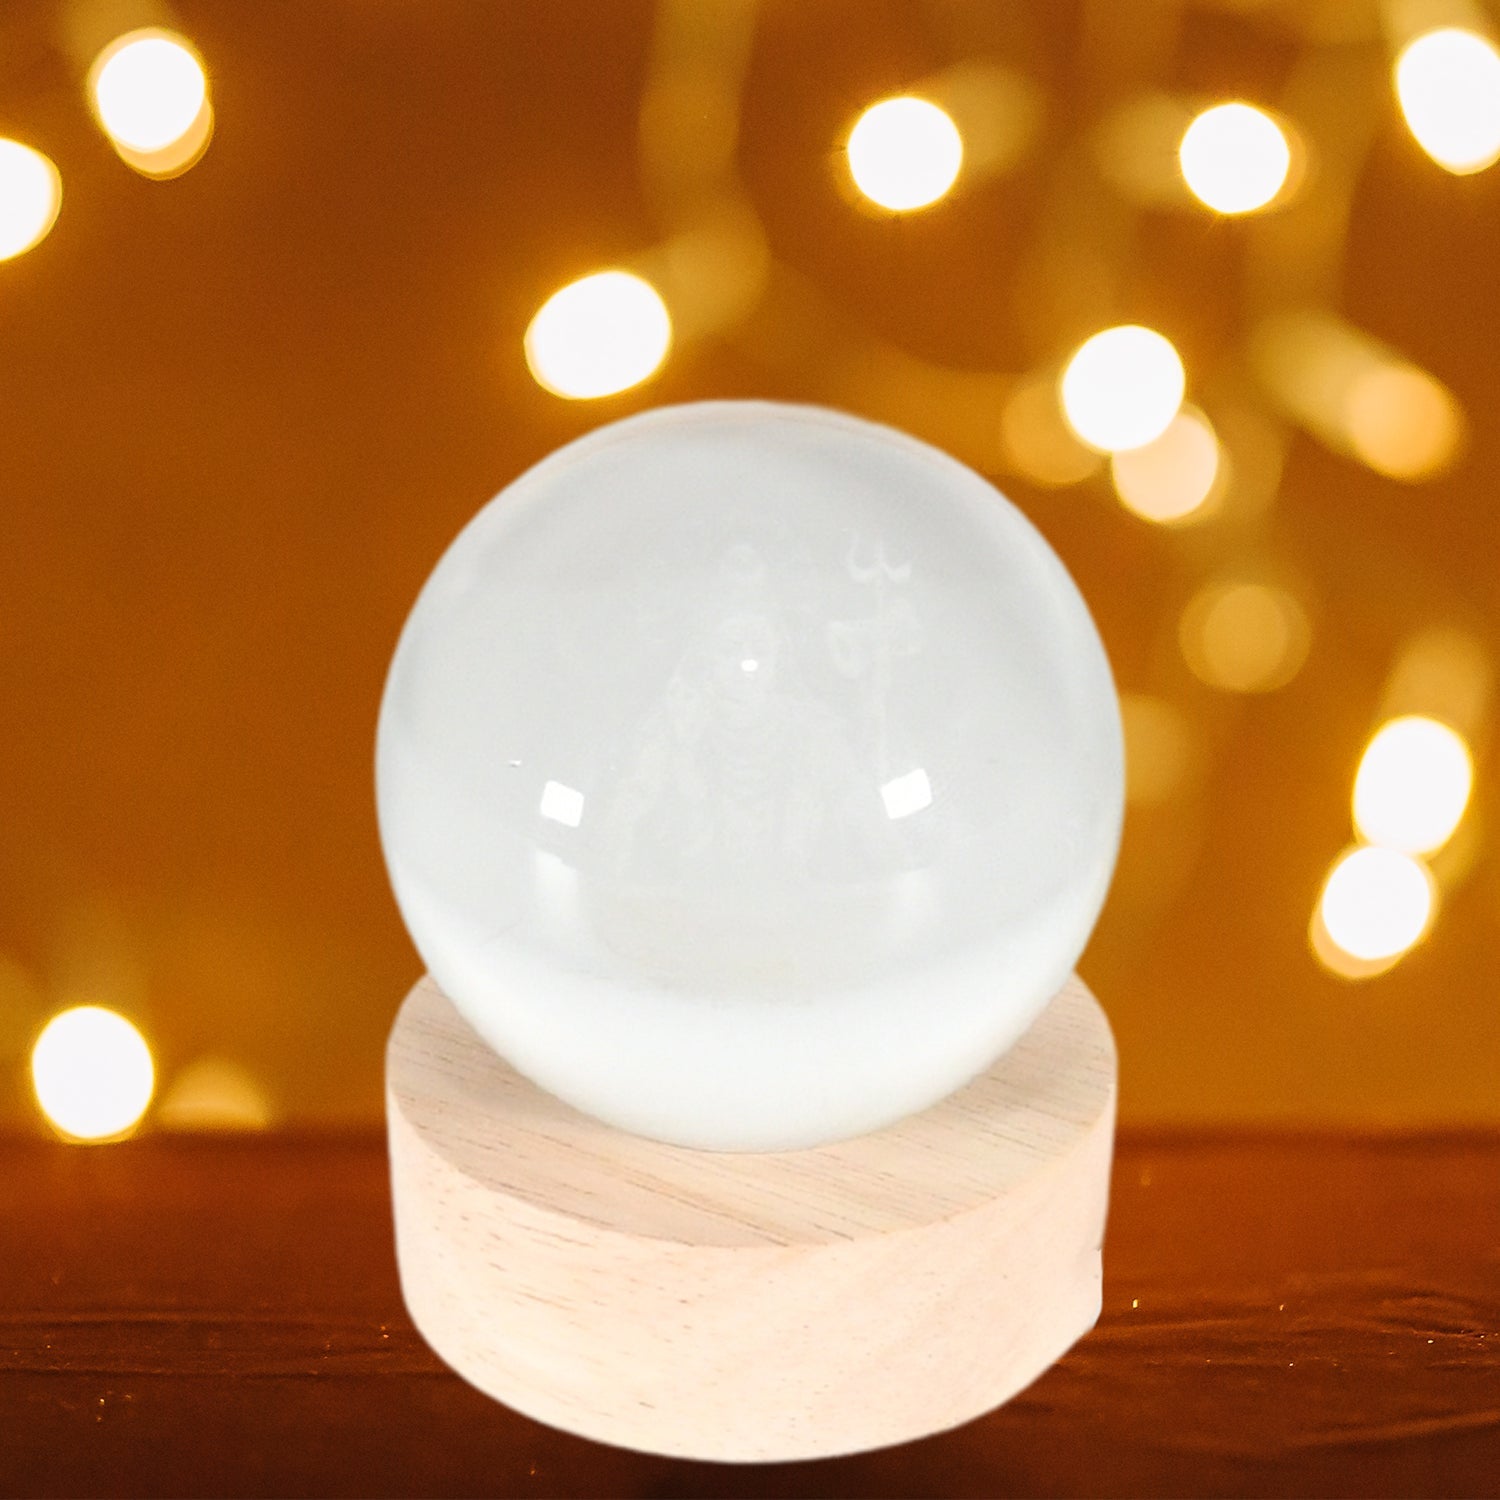 3D Crystal Ball lamps for Bedroom 3D Lamps for Home Decoration 3D Crystal Ball Night Light Gifts for Women Gifts for Men Room Decor Items for Bedroom for Friend and Family (1 Pc)